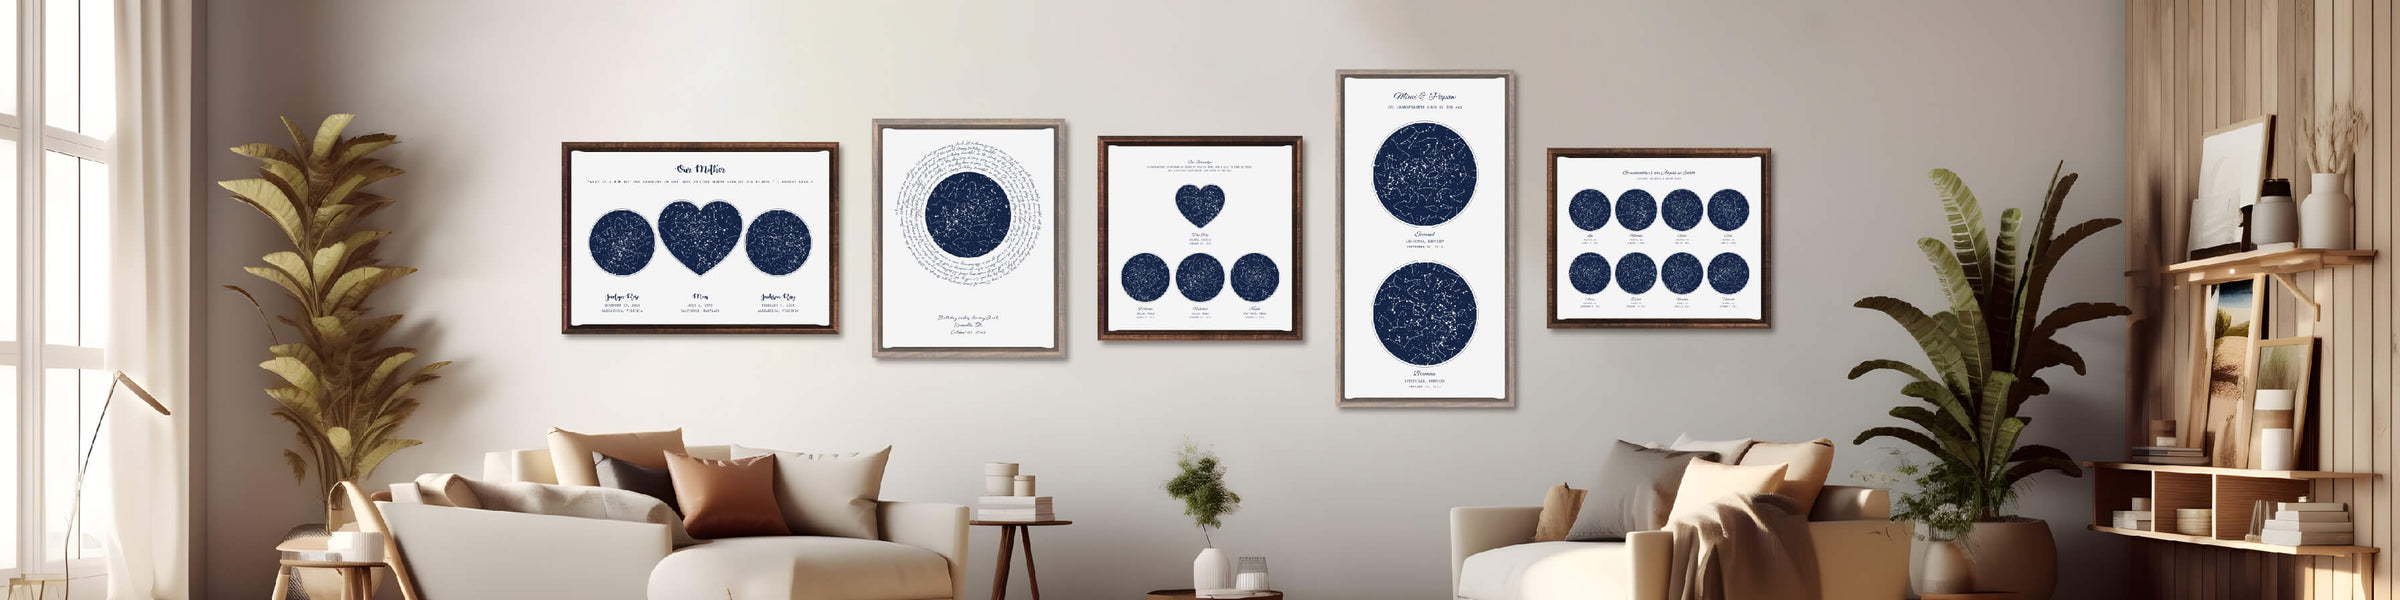 Star Map Collection, Designed With Meaning